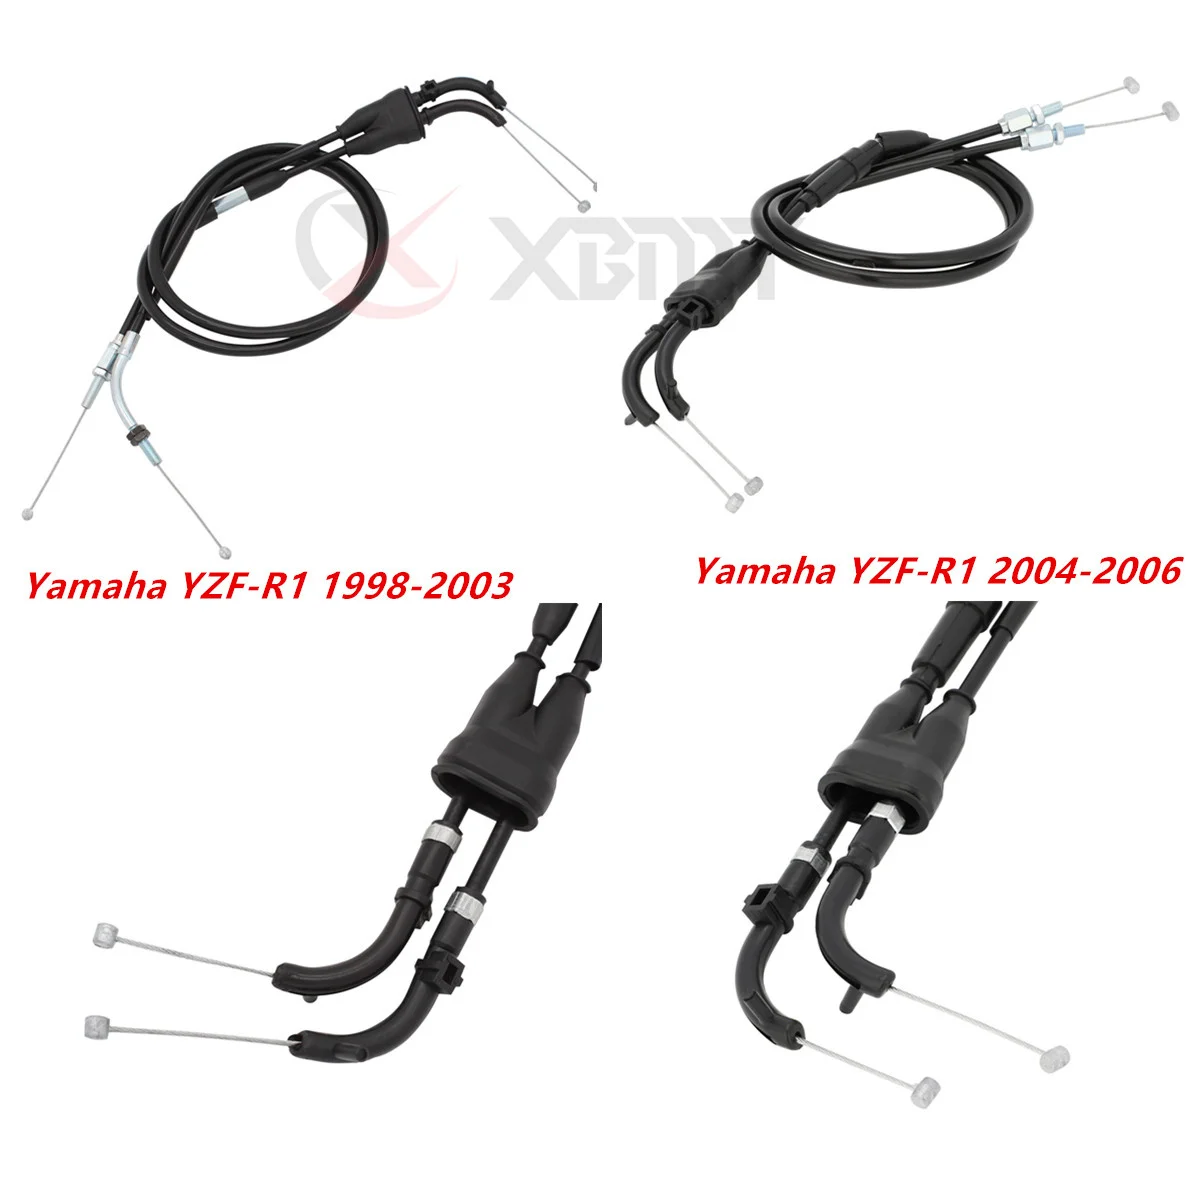 Motorcycle Throttle Cable Set For Yamaha YZF-R1 YZF R1 YZFR1 1998 1999 2000 2001 2002 2003 2004 2005 2006